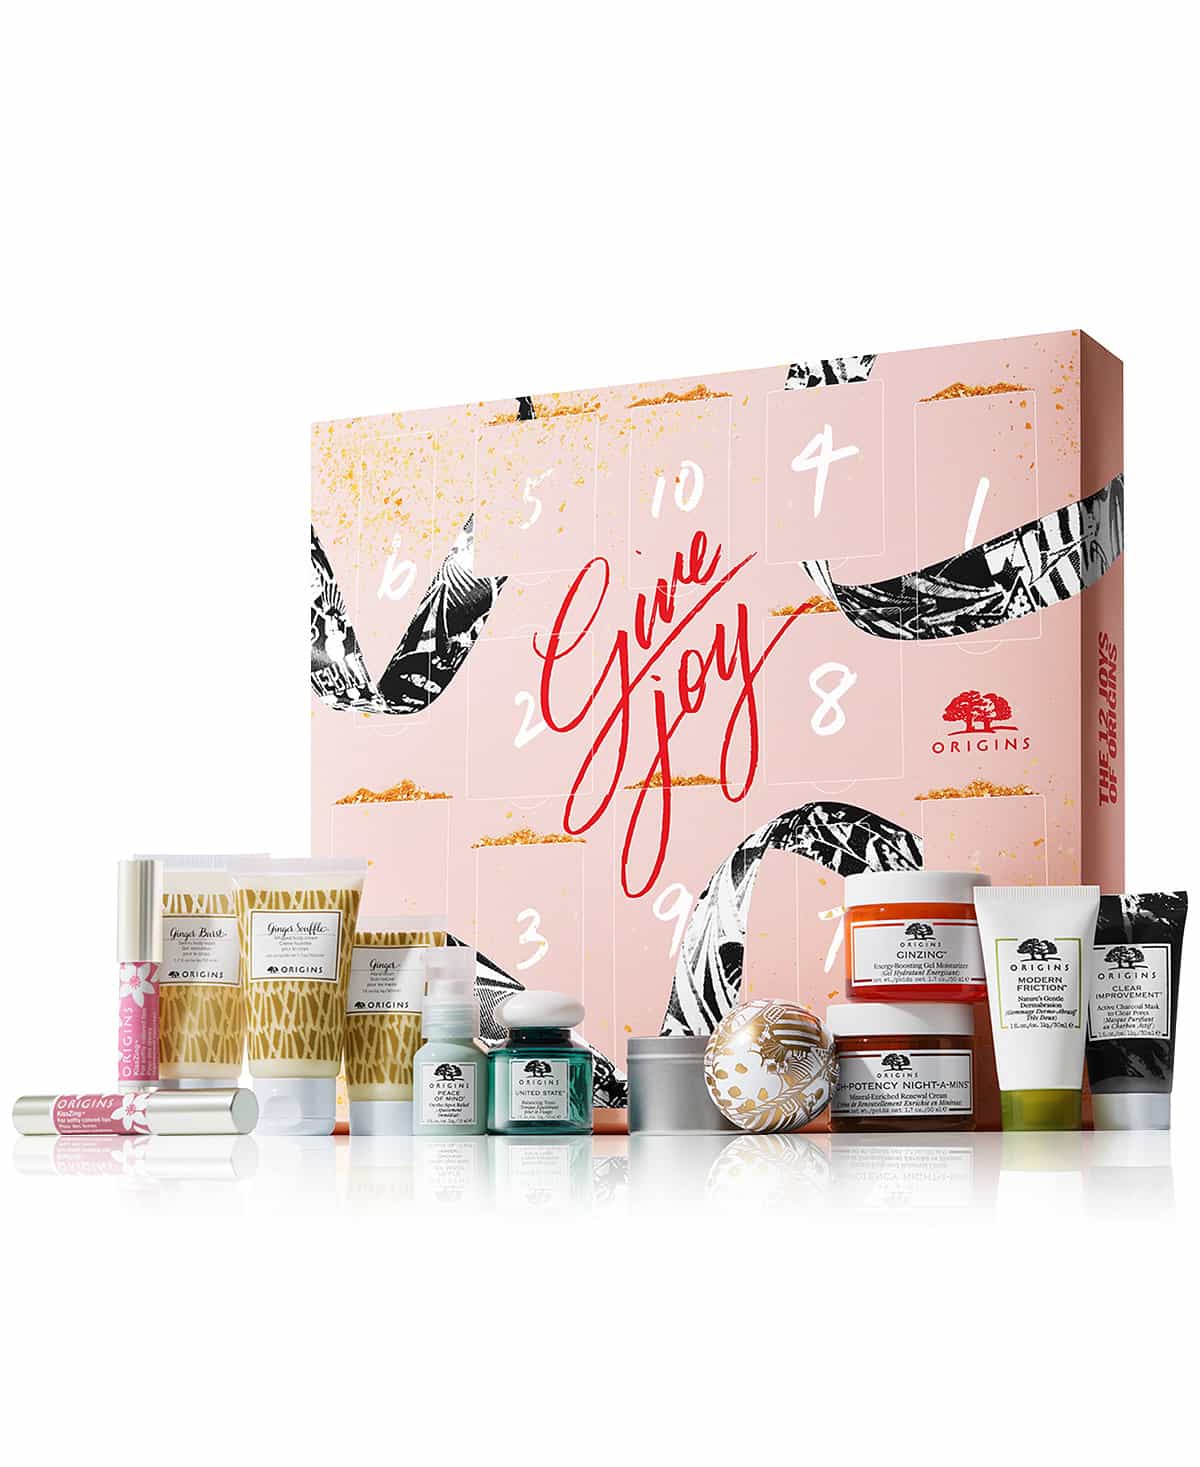 2017 Origins Beauty Advent Calendar Available Now + Full Spoilers